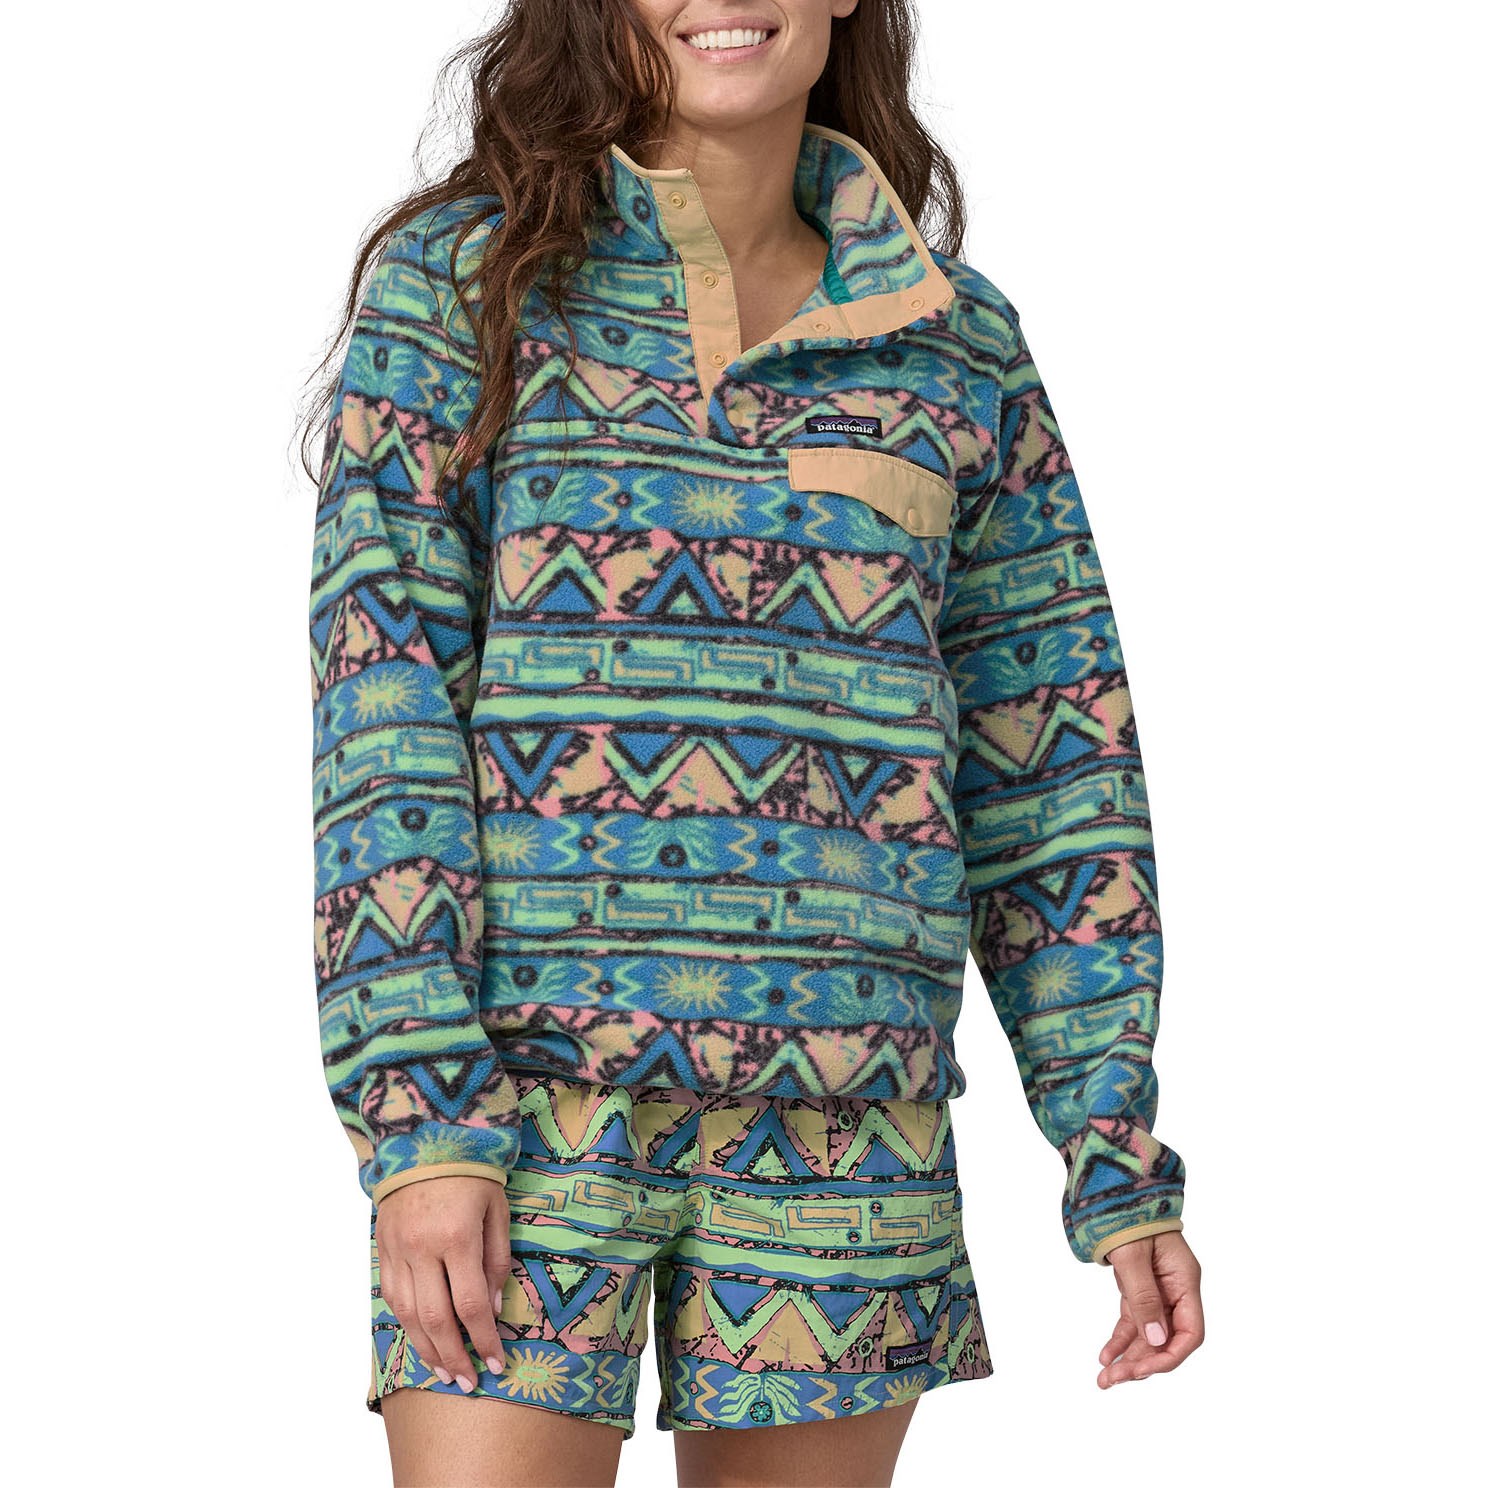 Patagonia Women's Lightweight Synchilla Snap-T Pullover